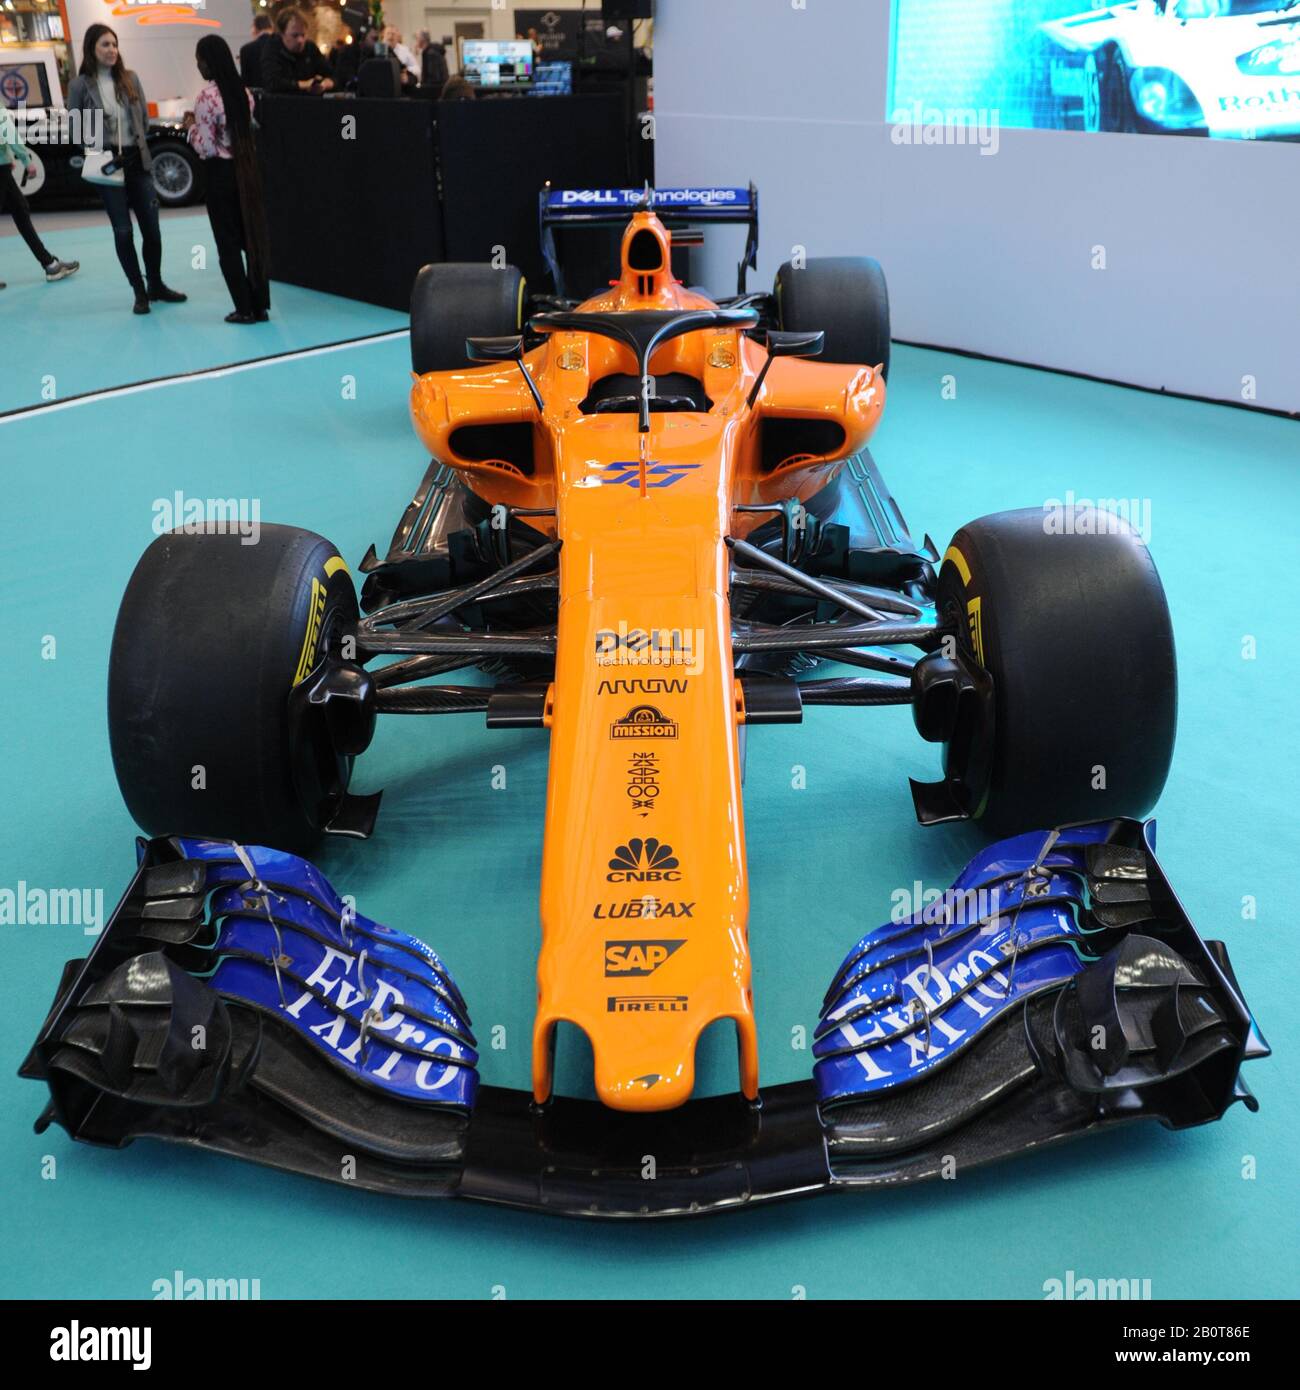 A McLaren MCL35 F1 racing car on display at the London Classic Car Show which opened today in Olympia London, United Kingdom